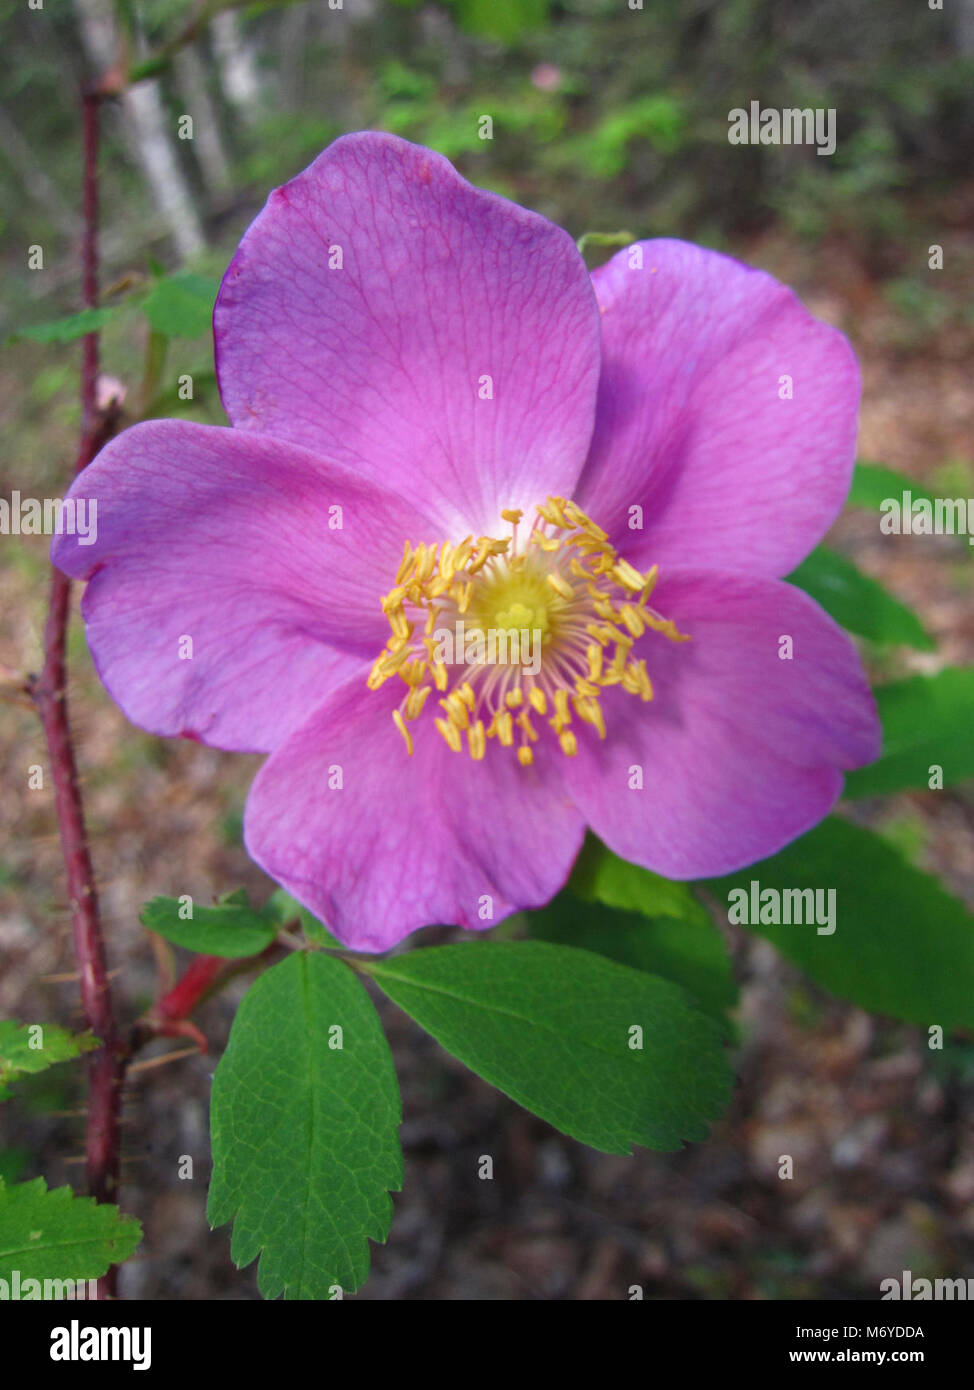 Wild Rose (Rosa acicularis) . The wild rose, also known as the arctic rose,  has distinctive light pink rounded petals Stock Photo - Alamy